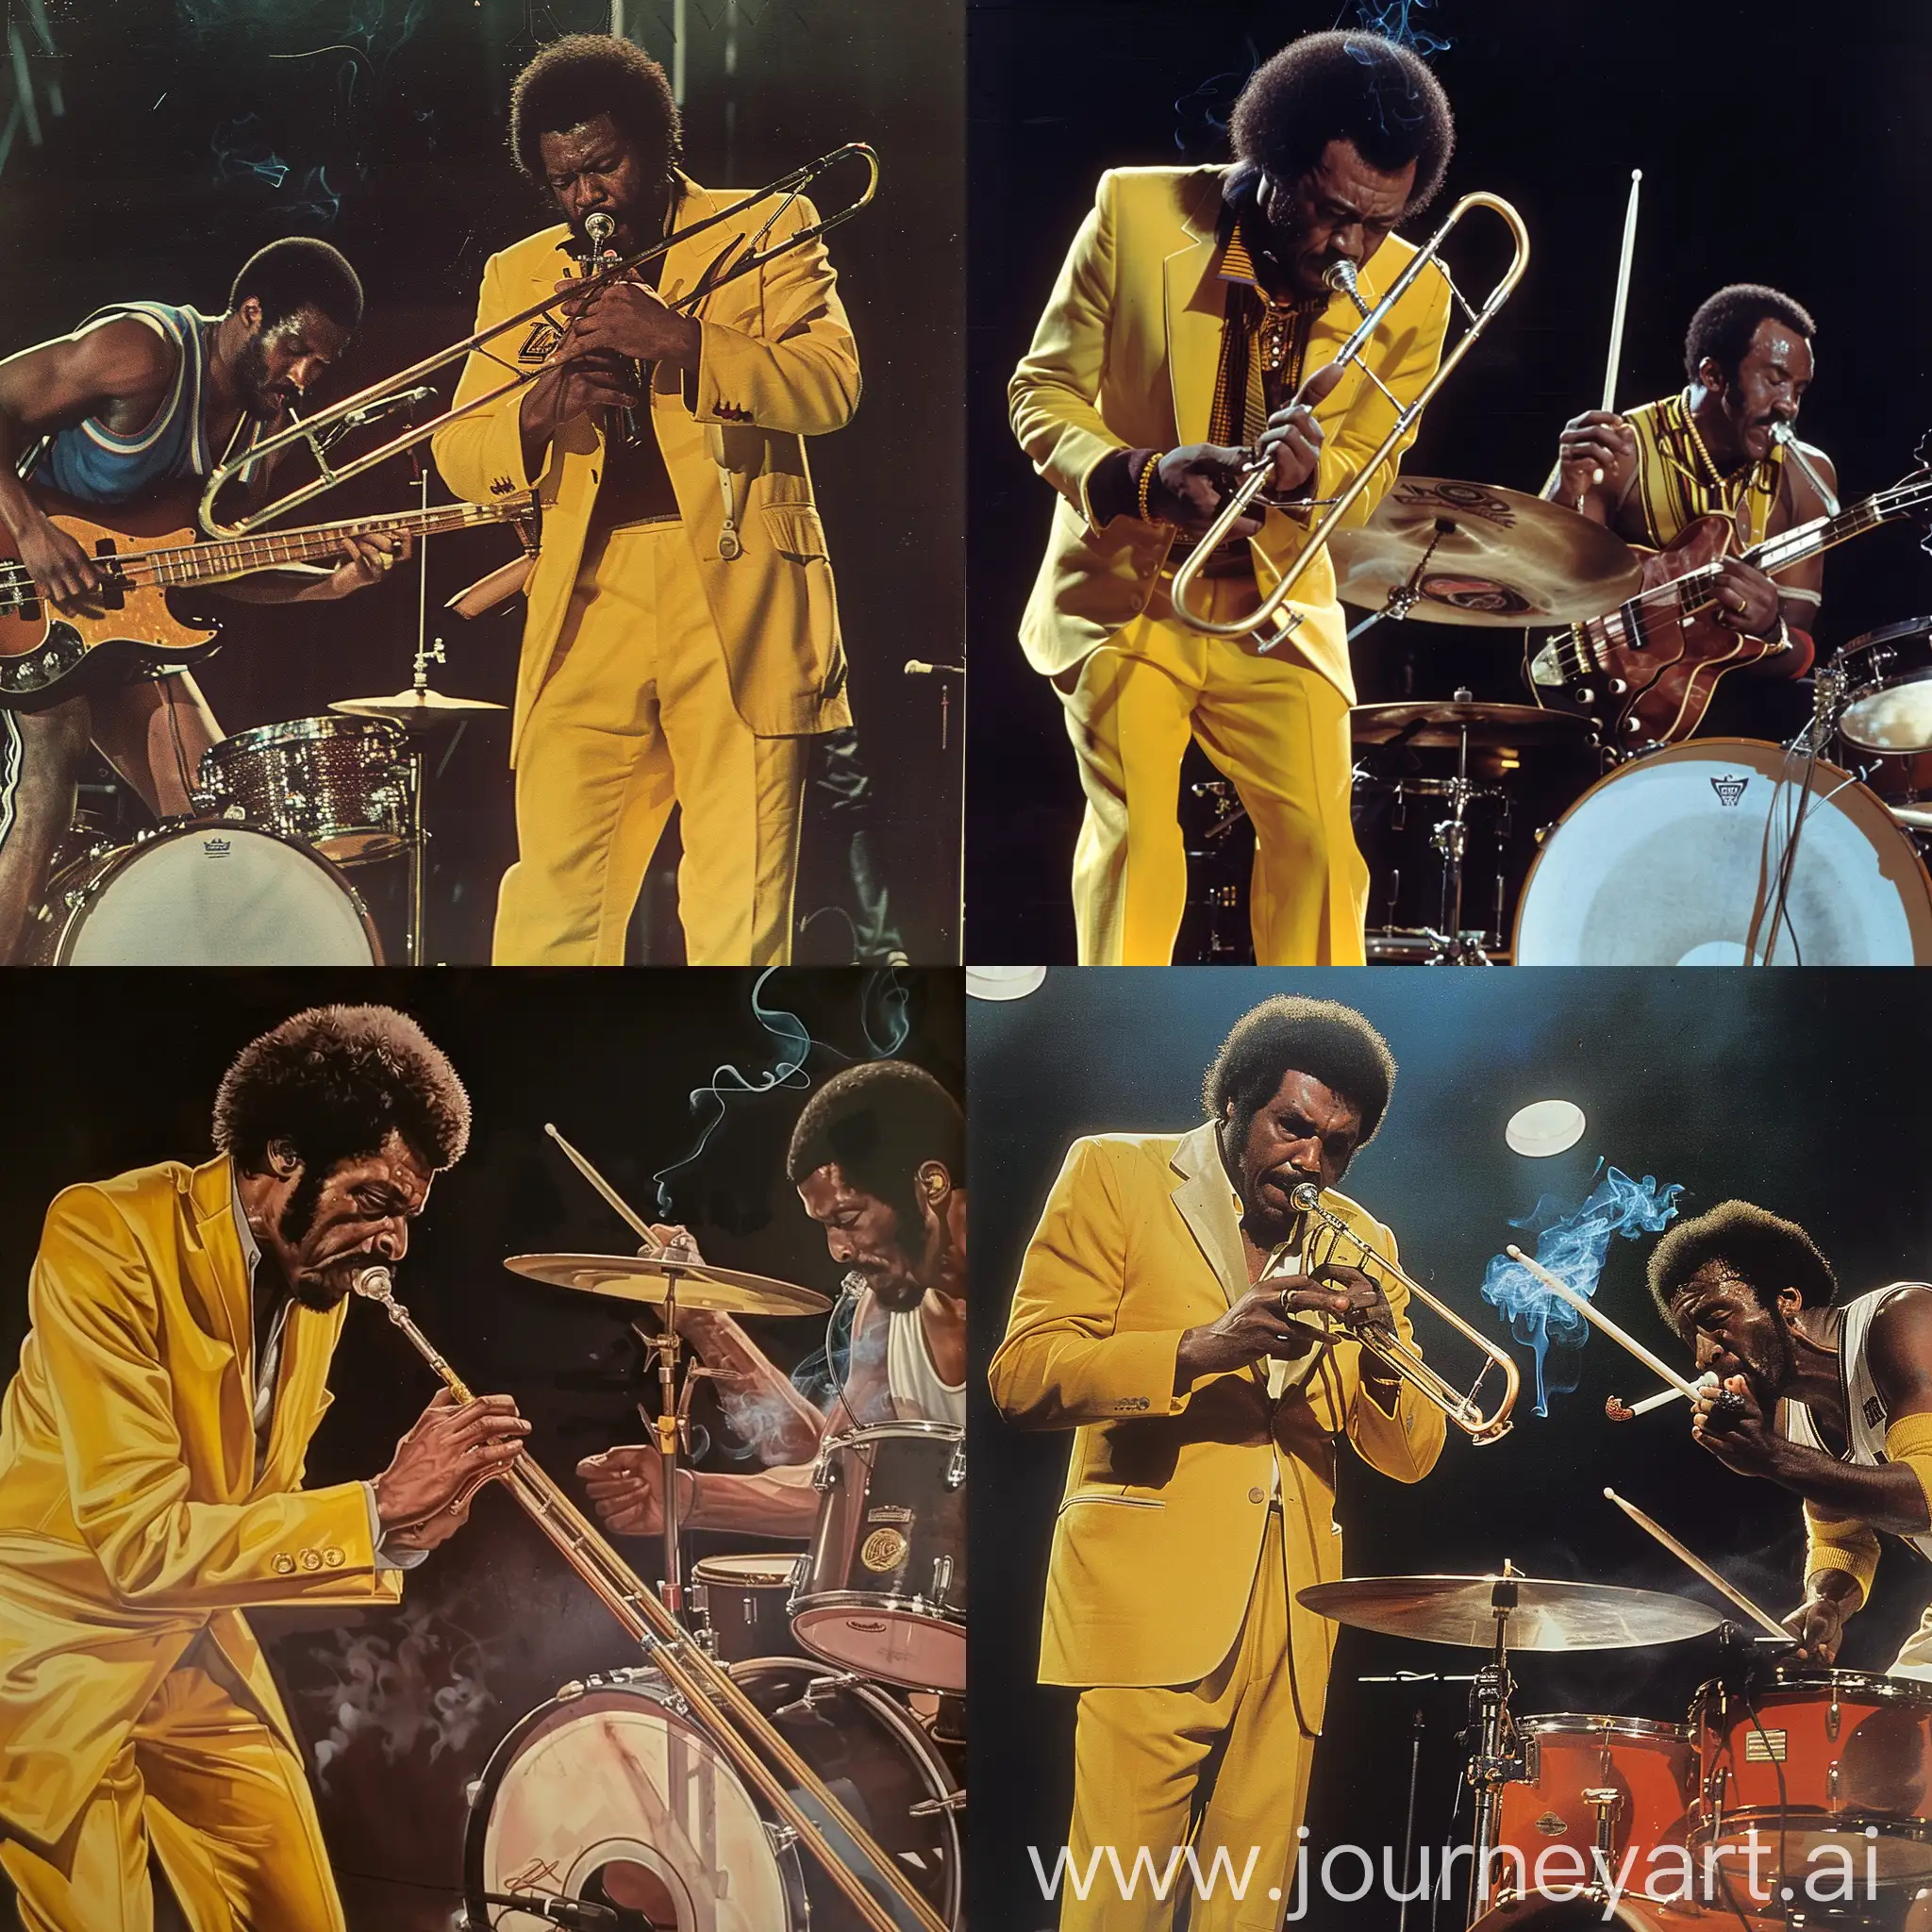 bruce lee is focused in his trombone playing.He is wearing a yellow suit. and near Karen Abdul Jabbar, the LA Lakers player, with his afro hair is wearing a smoking. He is playing a Fender precision bass
Cassius Clay is playing drums.